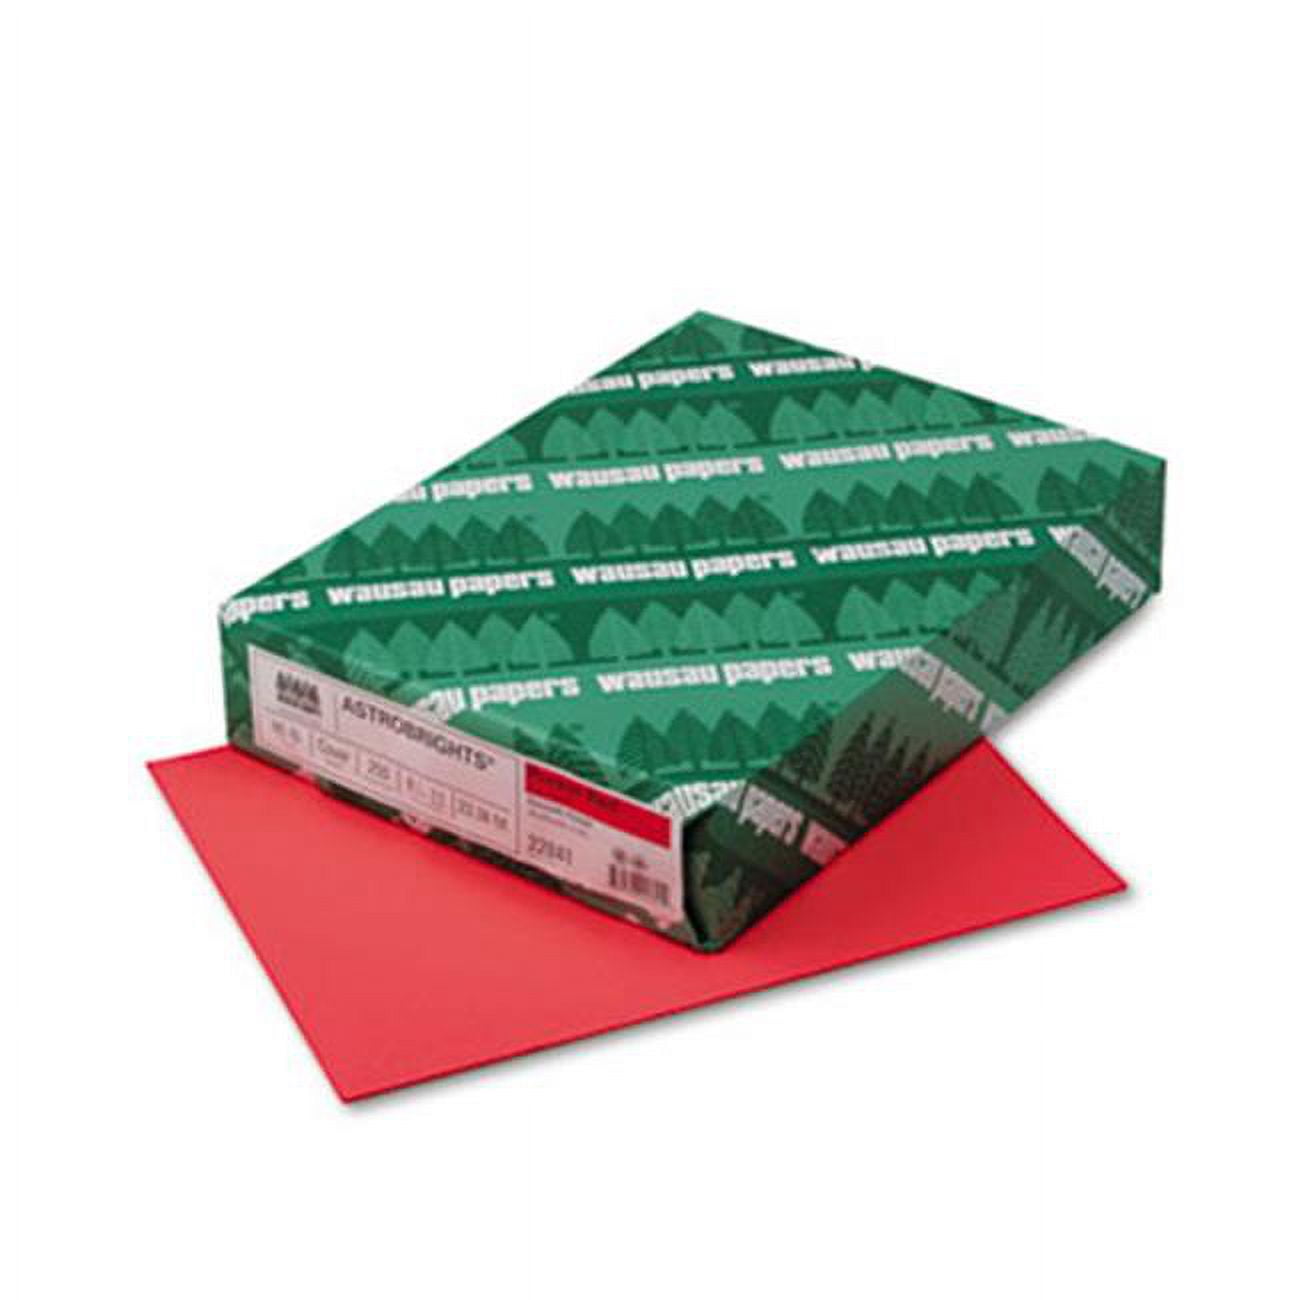 Wausau Paper Astrobrights Colored Card Stock 65 lbs. 8.5 x 11 Rocket Red 250 Sheets, Green